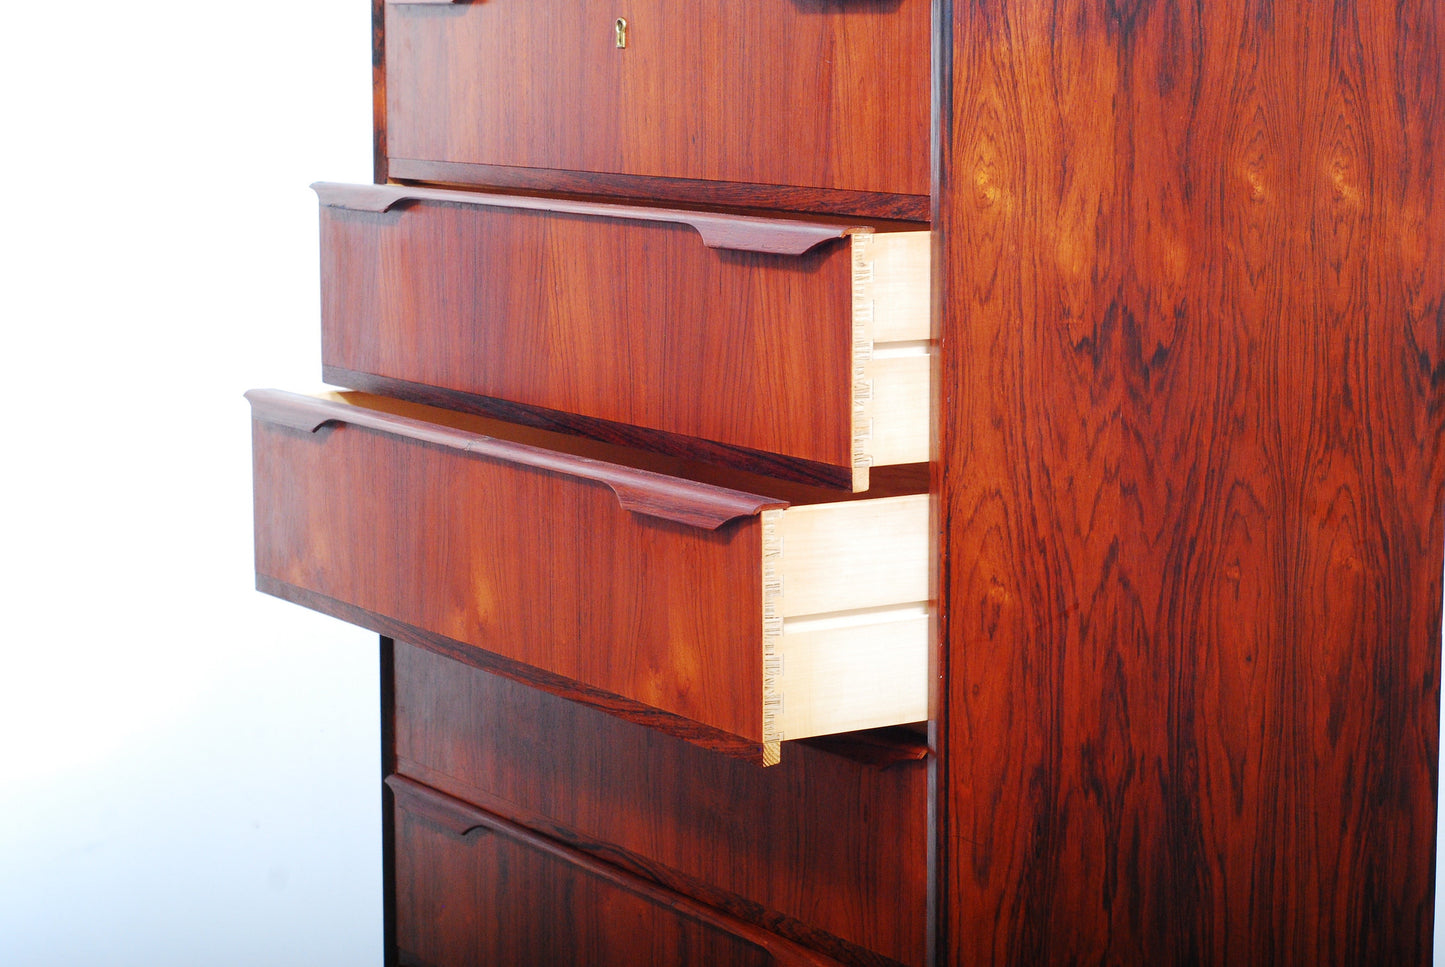 Large rosewood chest of drawers